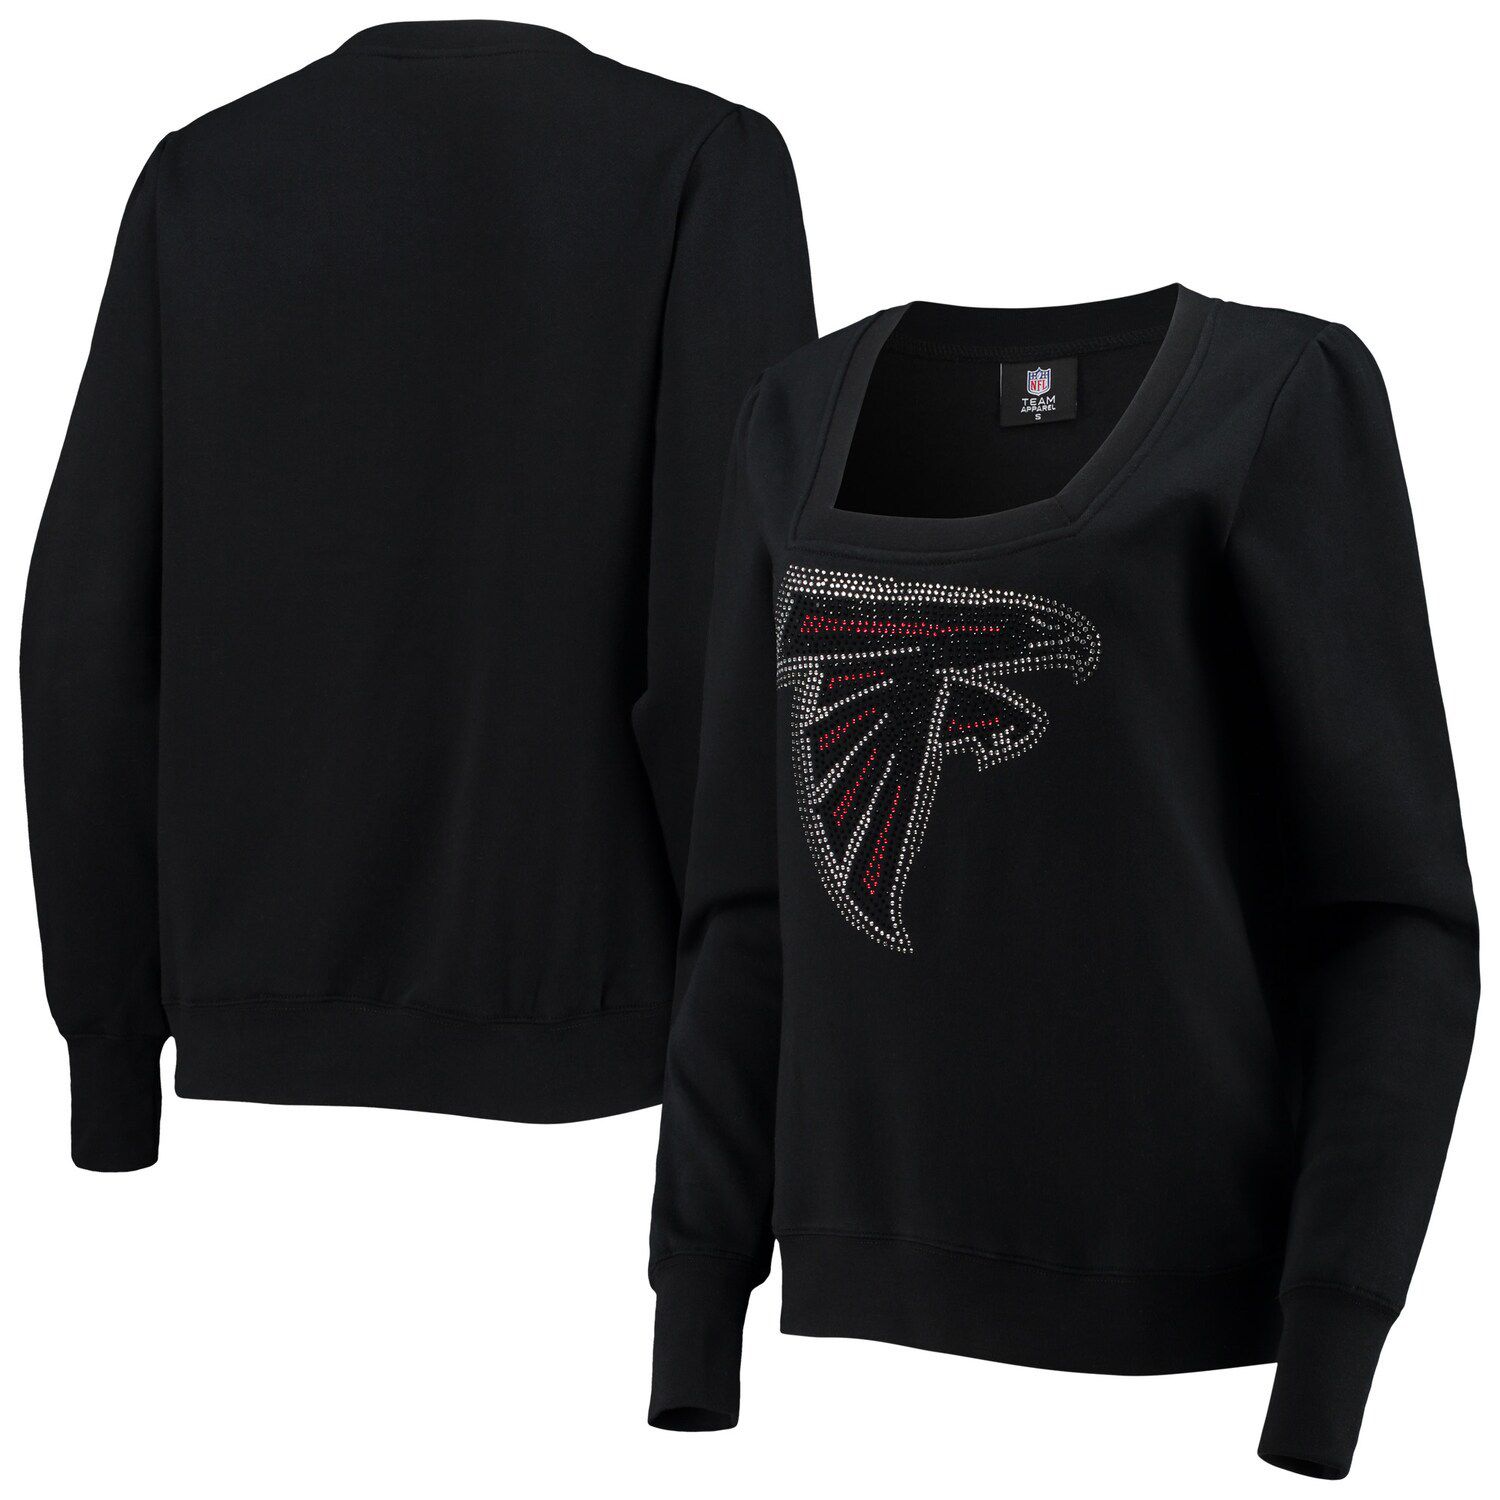 Image for Unbranded Women's Cuce Black Atlanta Falcons Winners Square Neck Pullover Sweatshirt at Kohl's.